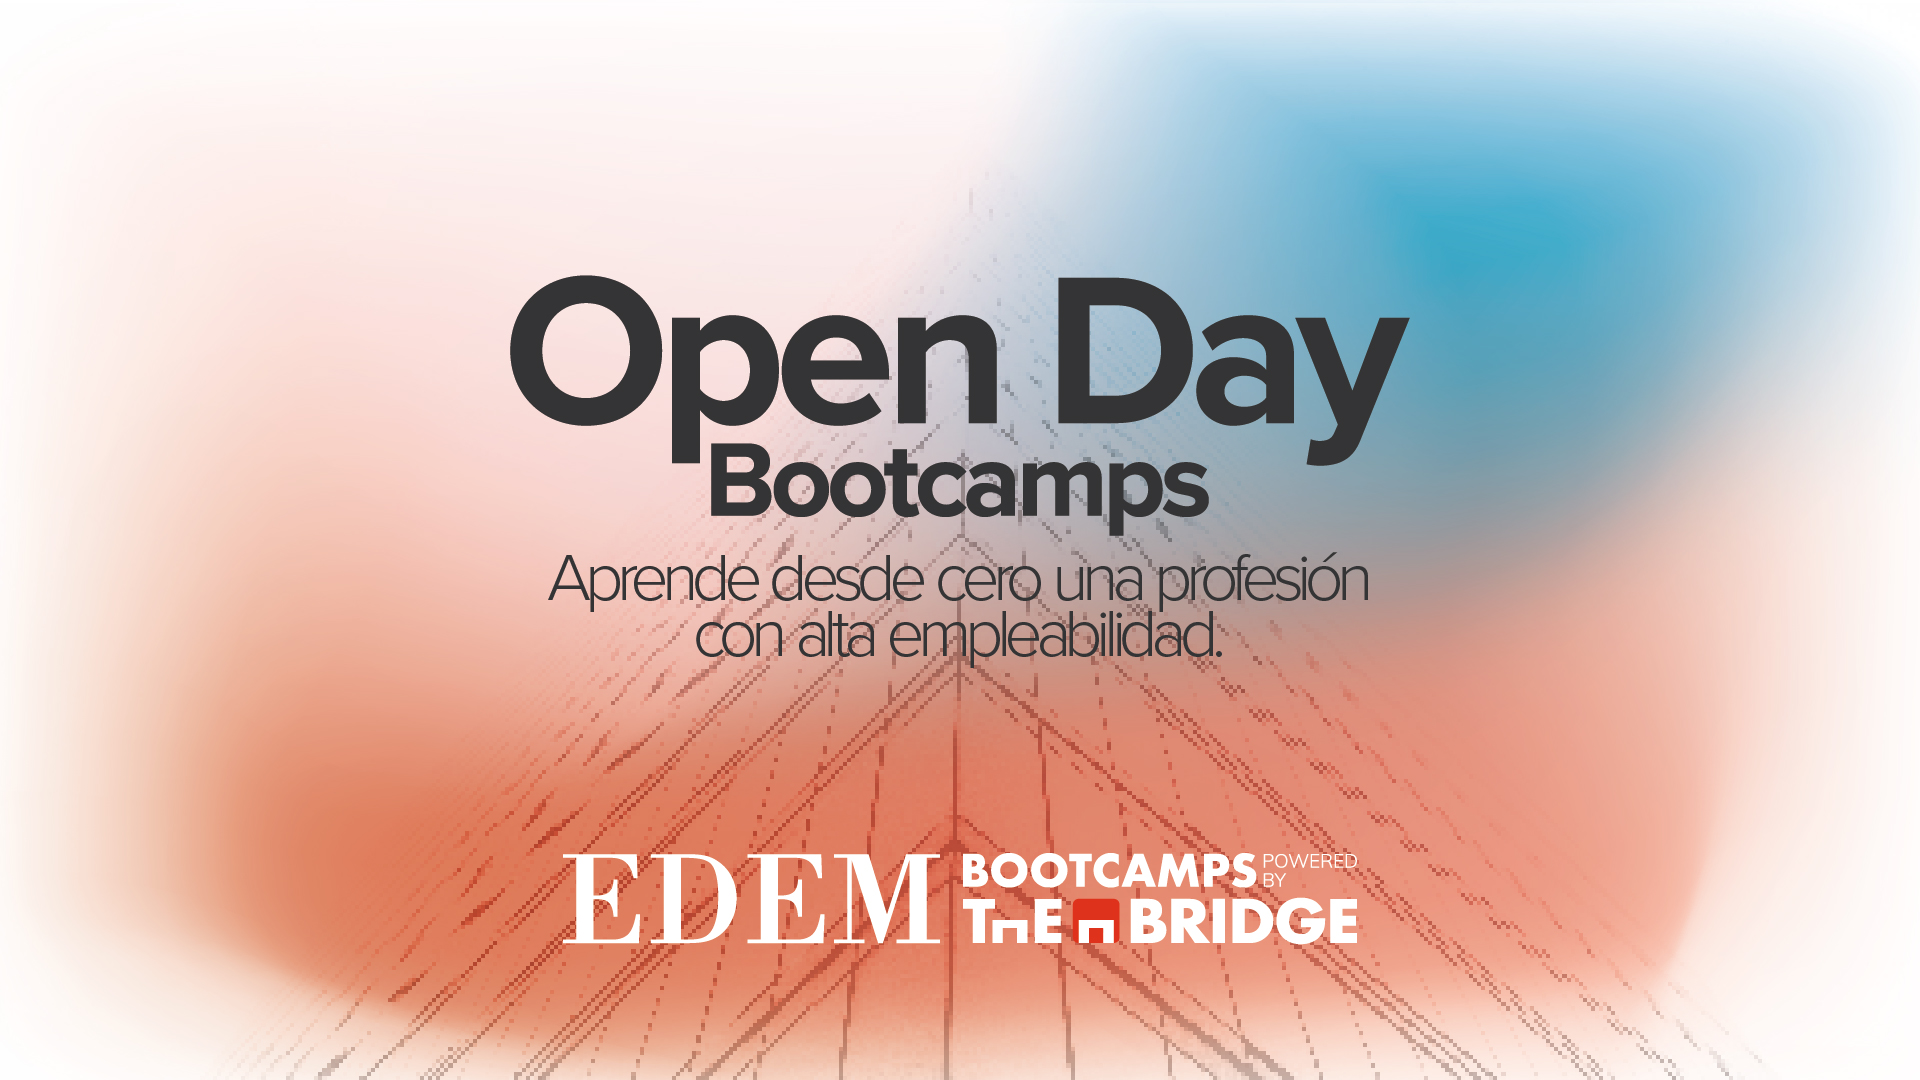 Open Day Bootcamps EDEM powered by The Bridge